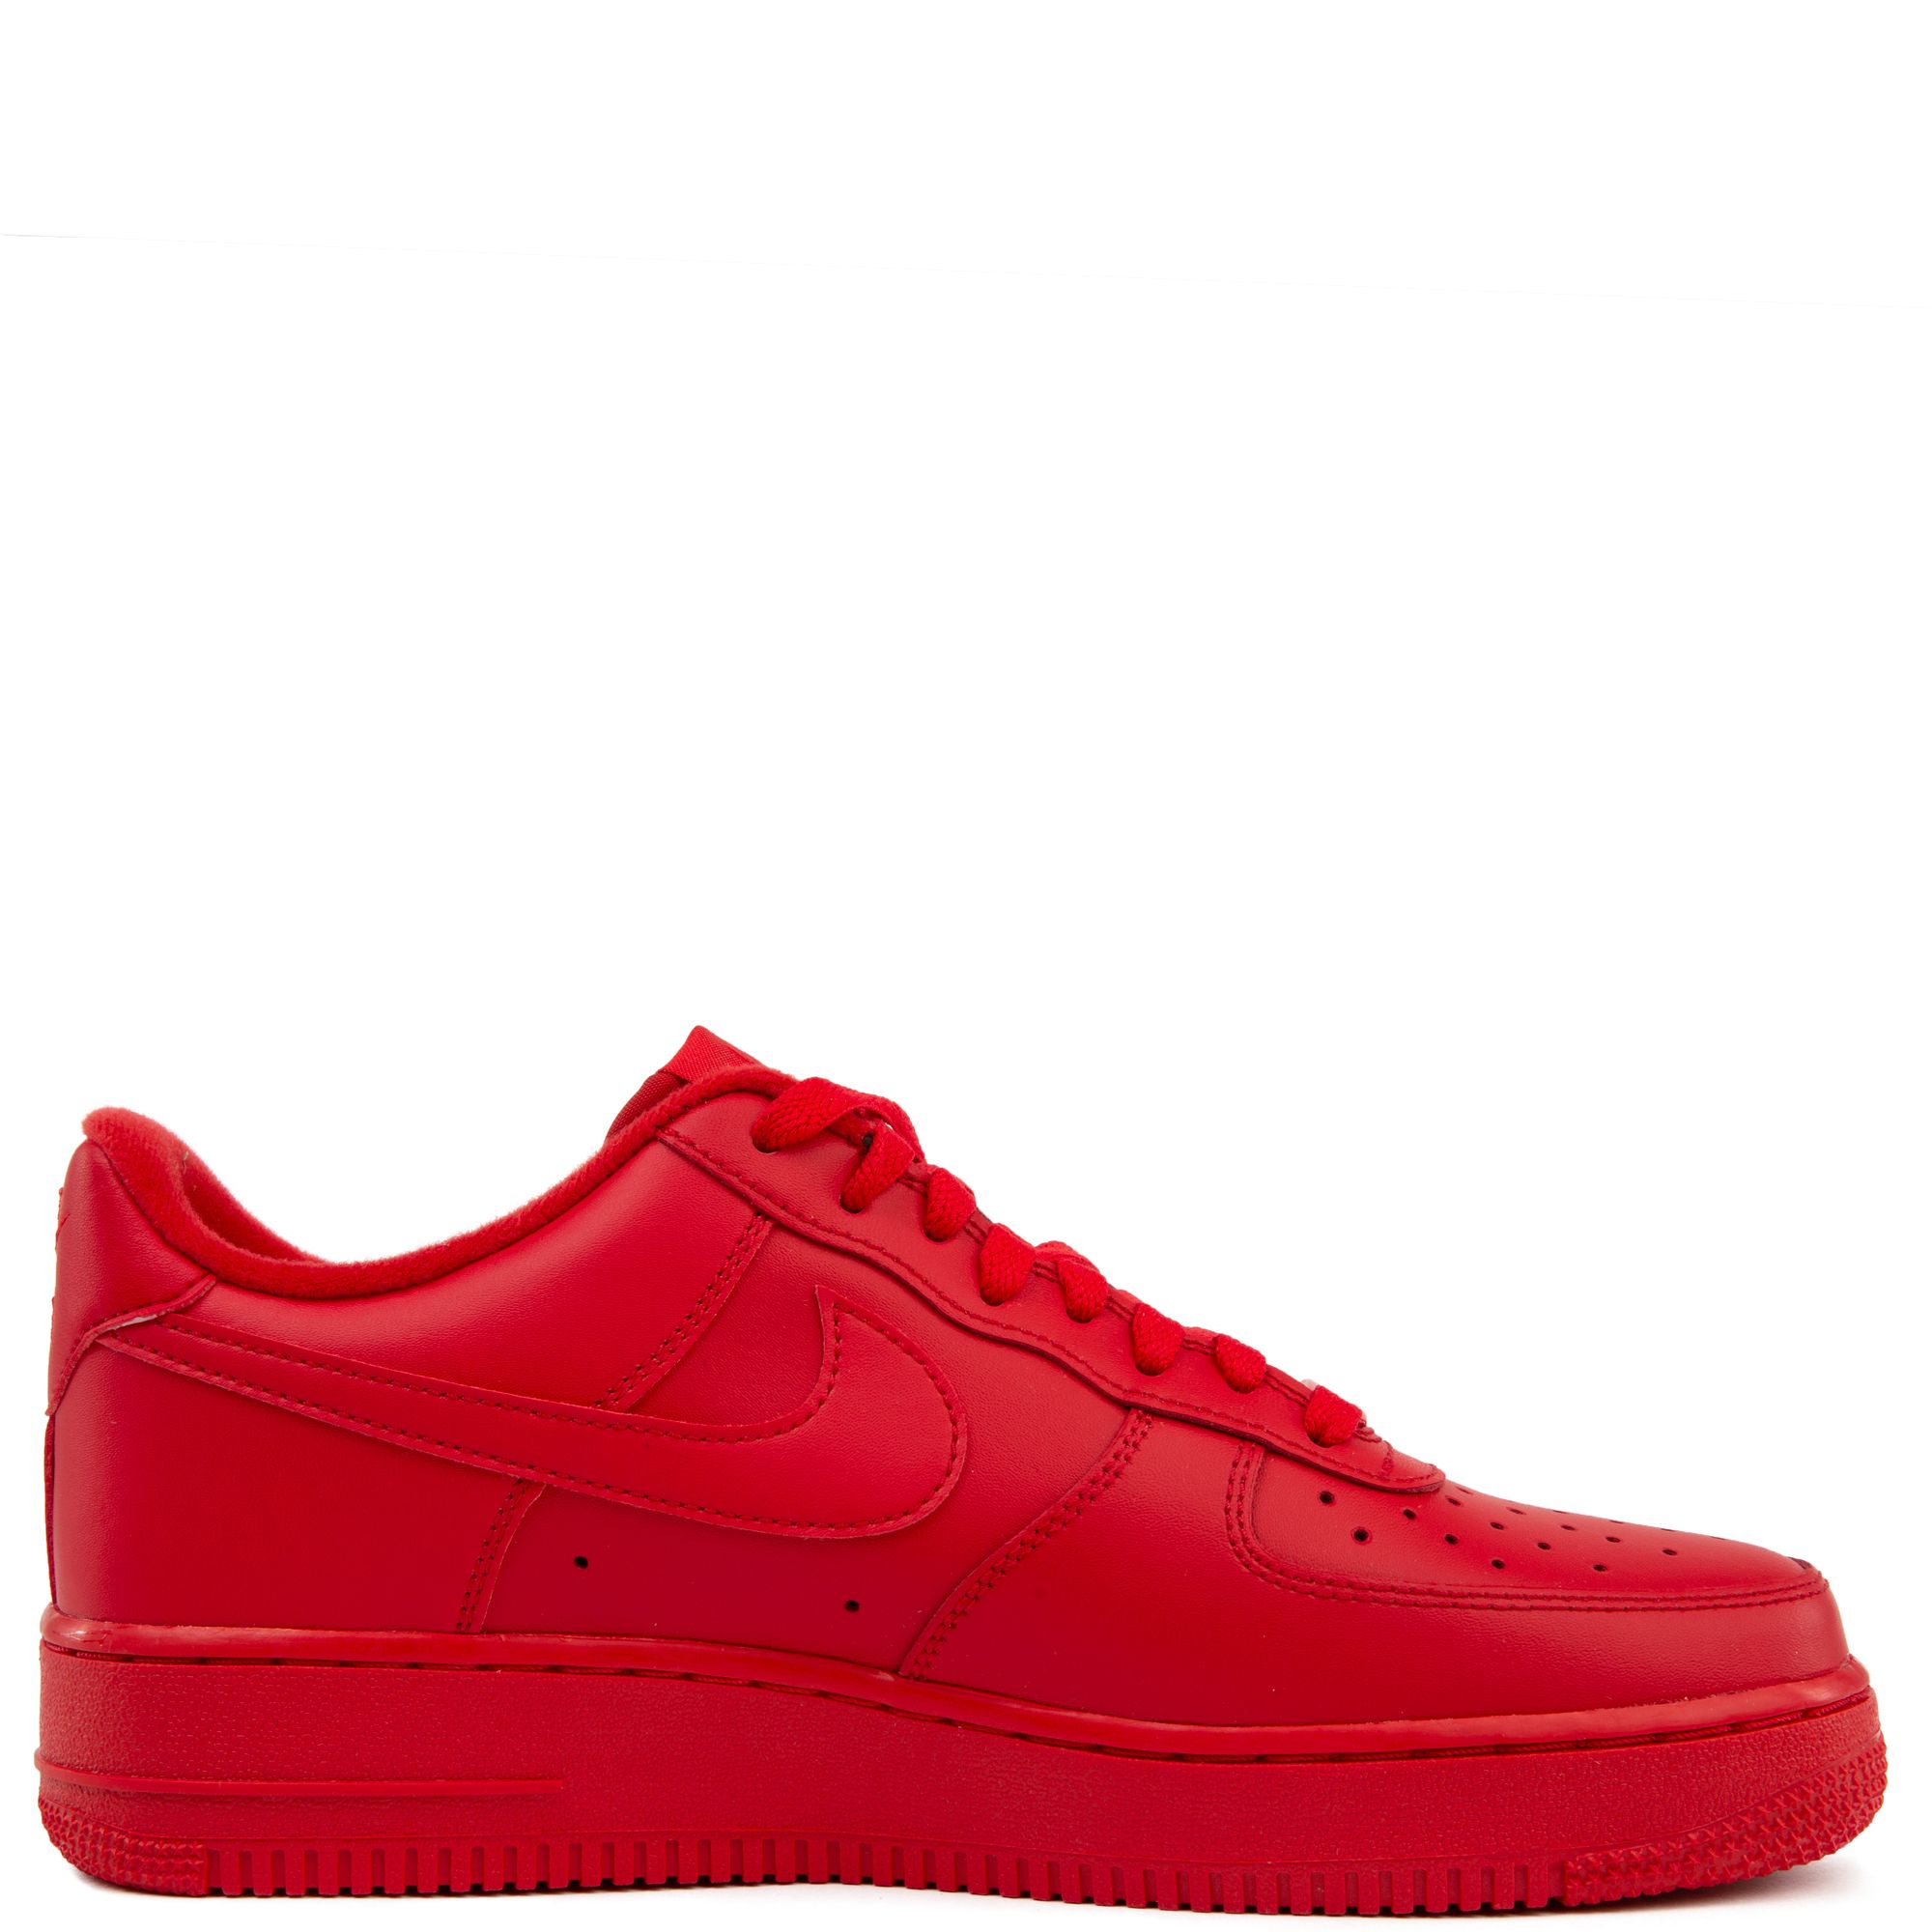 Nike Men's Air Force 1 '07 LV8 1 Casual Shoes in Red Size 9.5